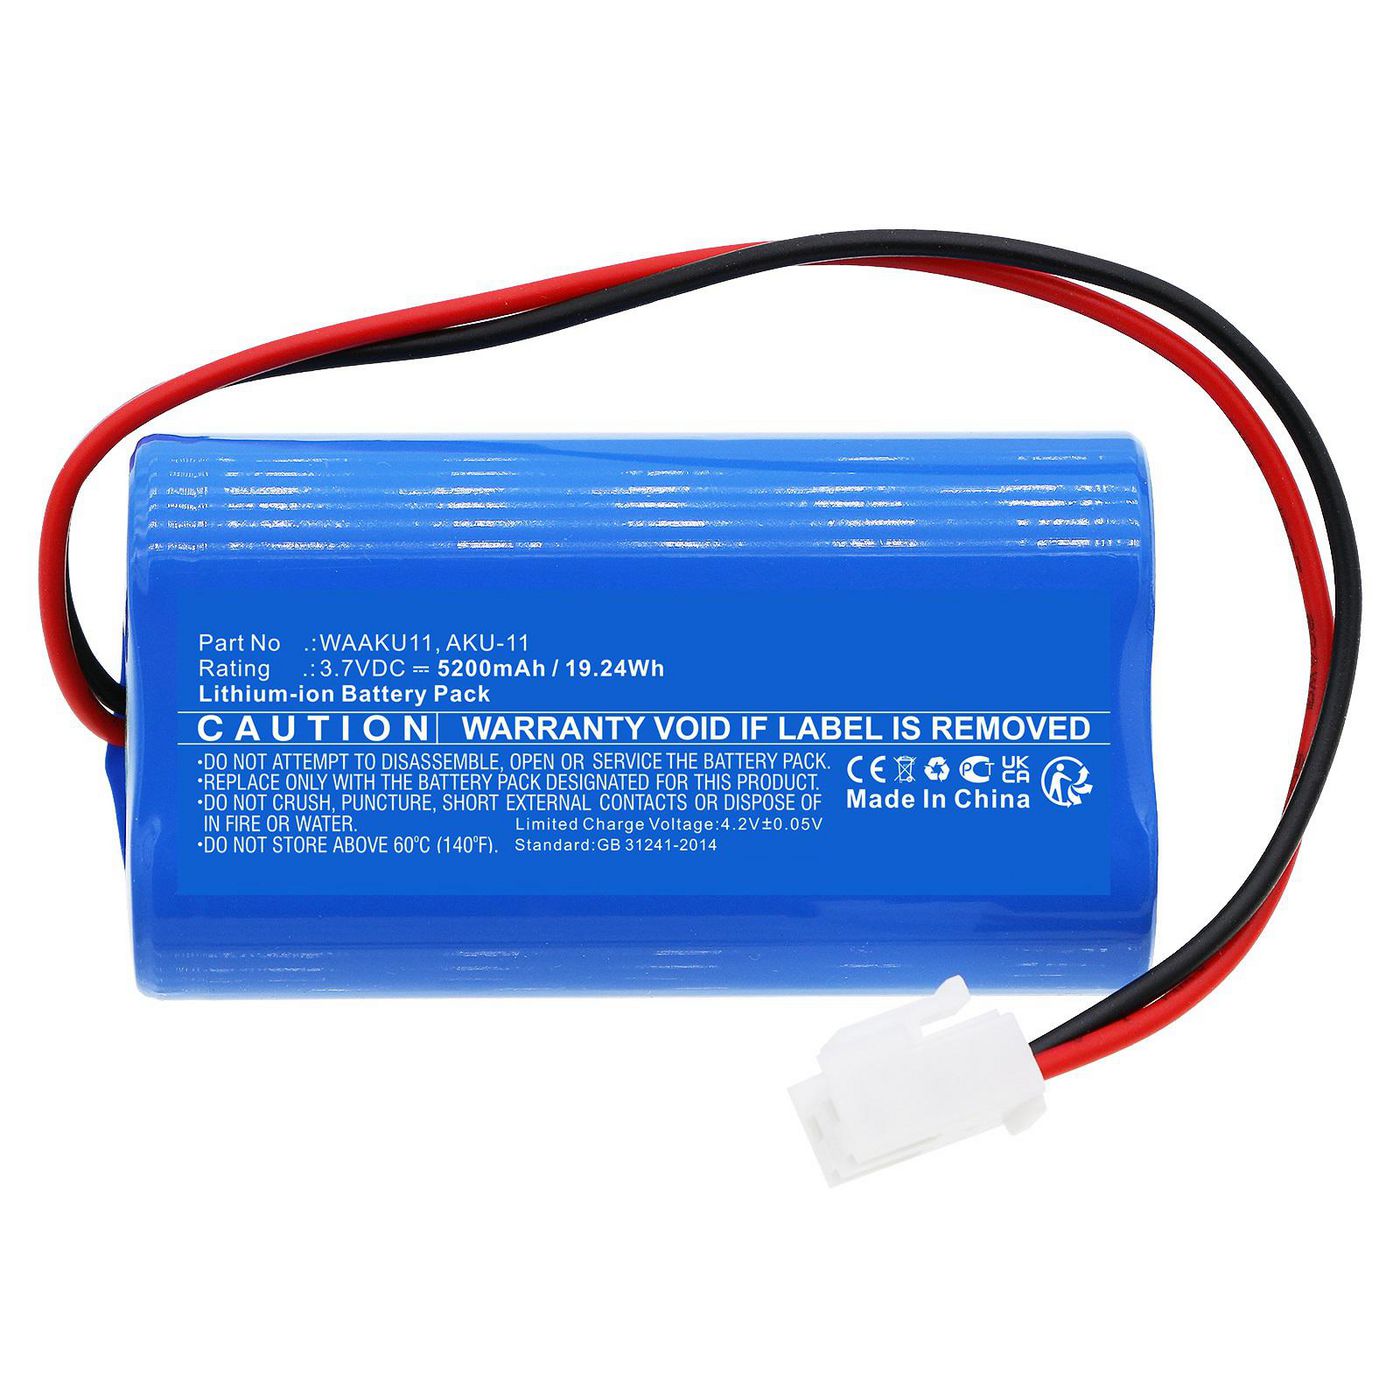 CoreParts MBXSRVY-BA420 W128426860 Battery for SONEL Equipment, 